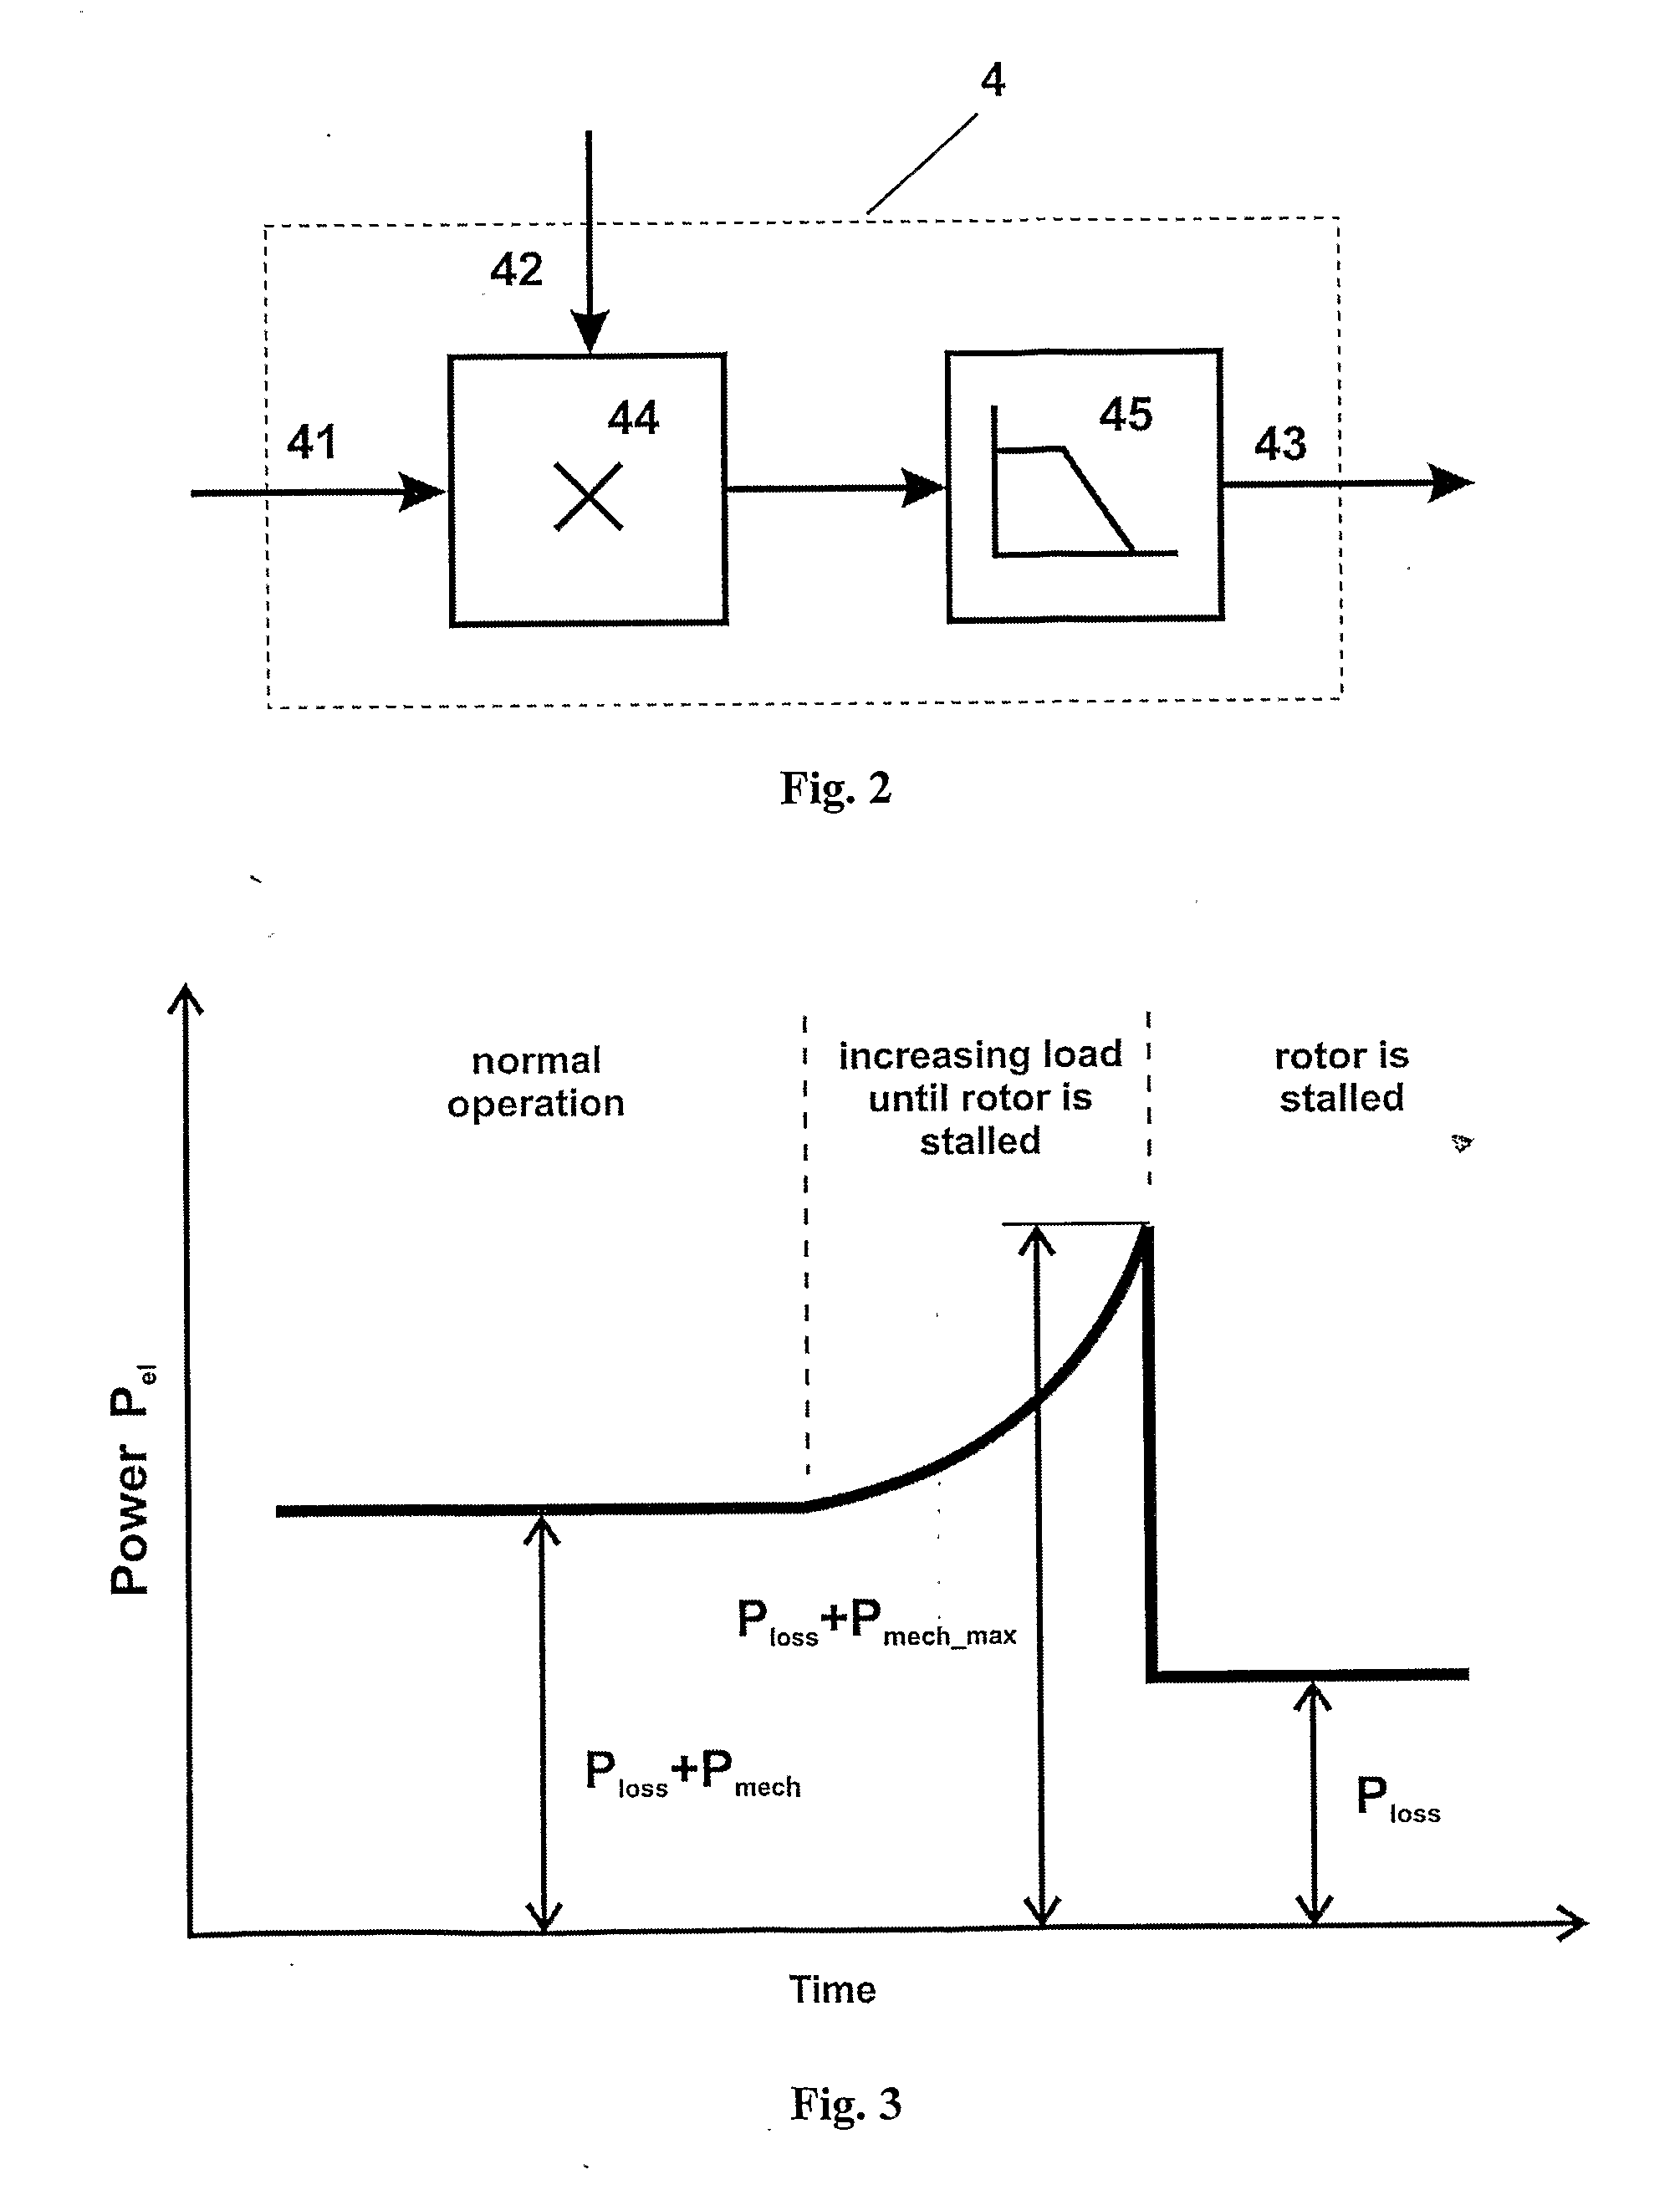 Method for control of synchronous electrical motors